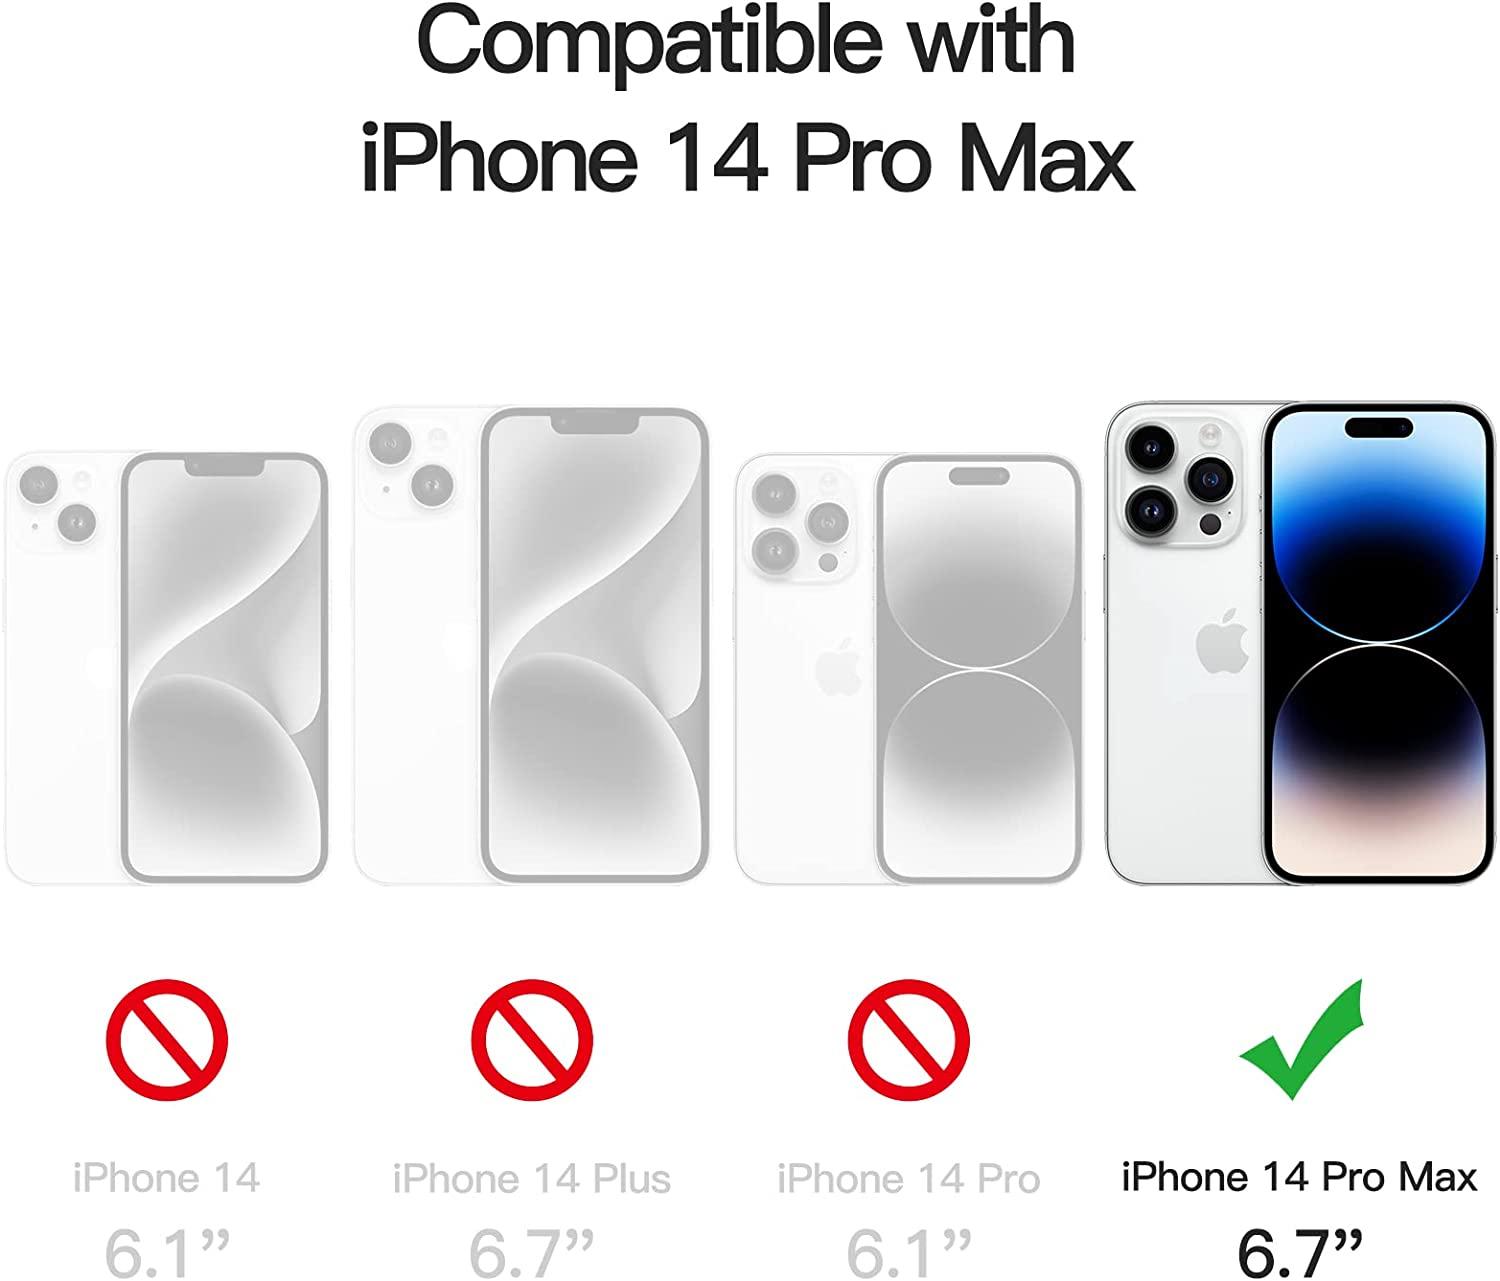 JETech [2 in 1] Case for iPhone 13 Pro Max 6.7-Inch with 2-Pack Screen  Protector